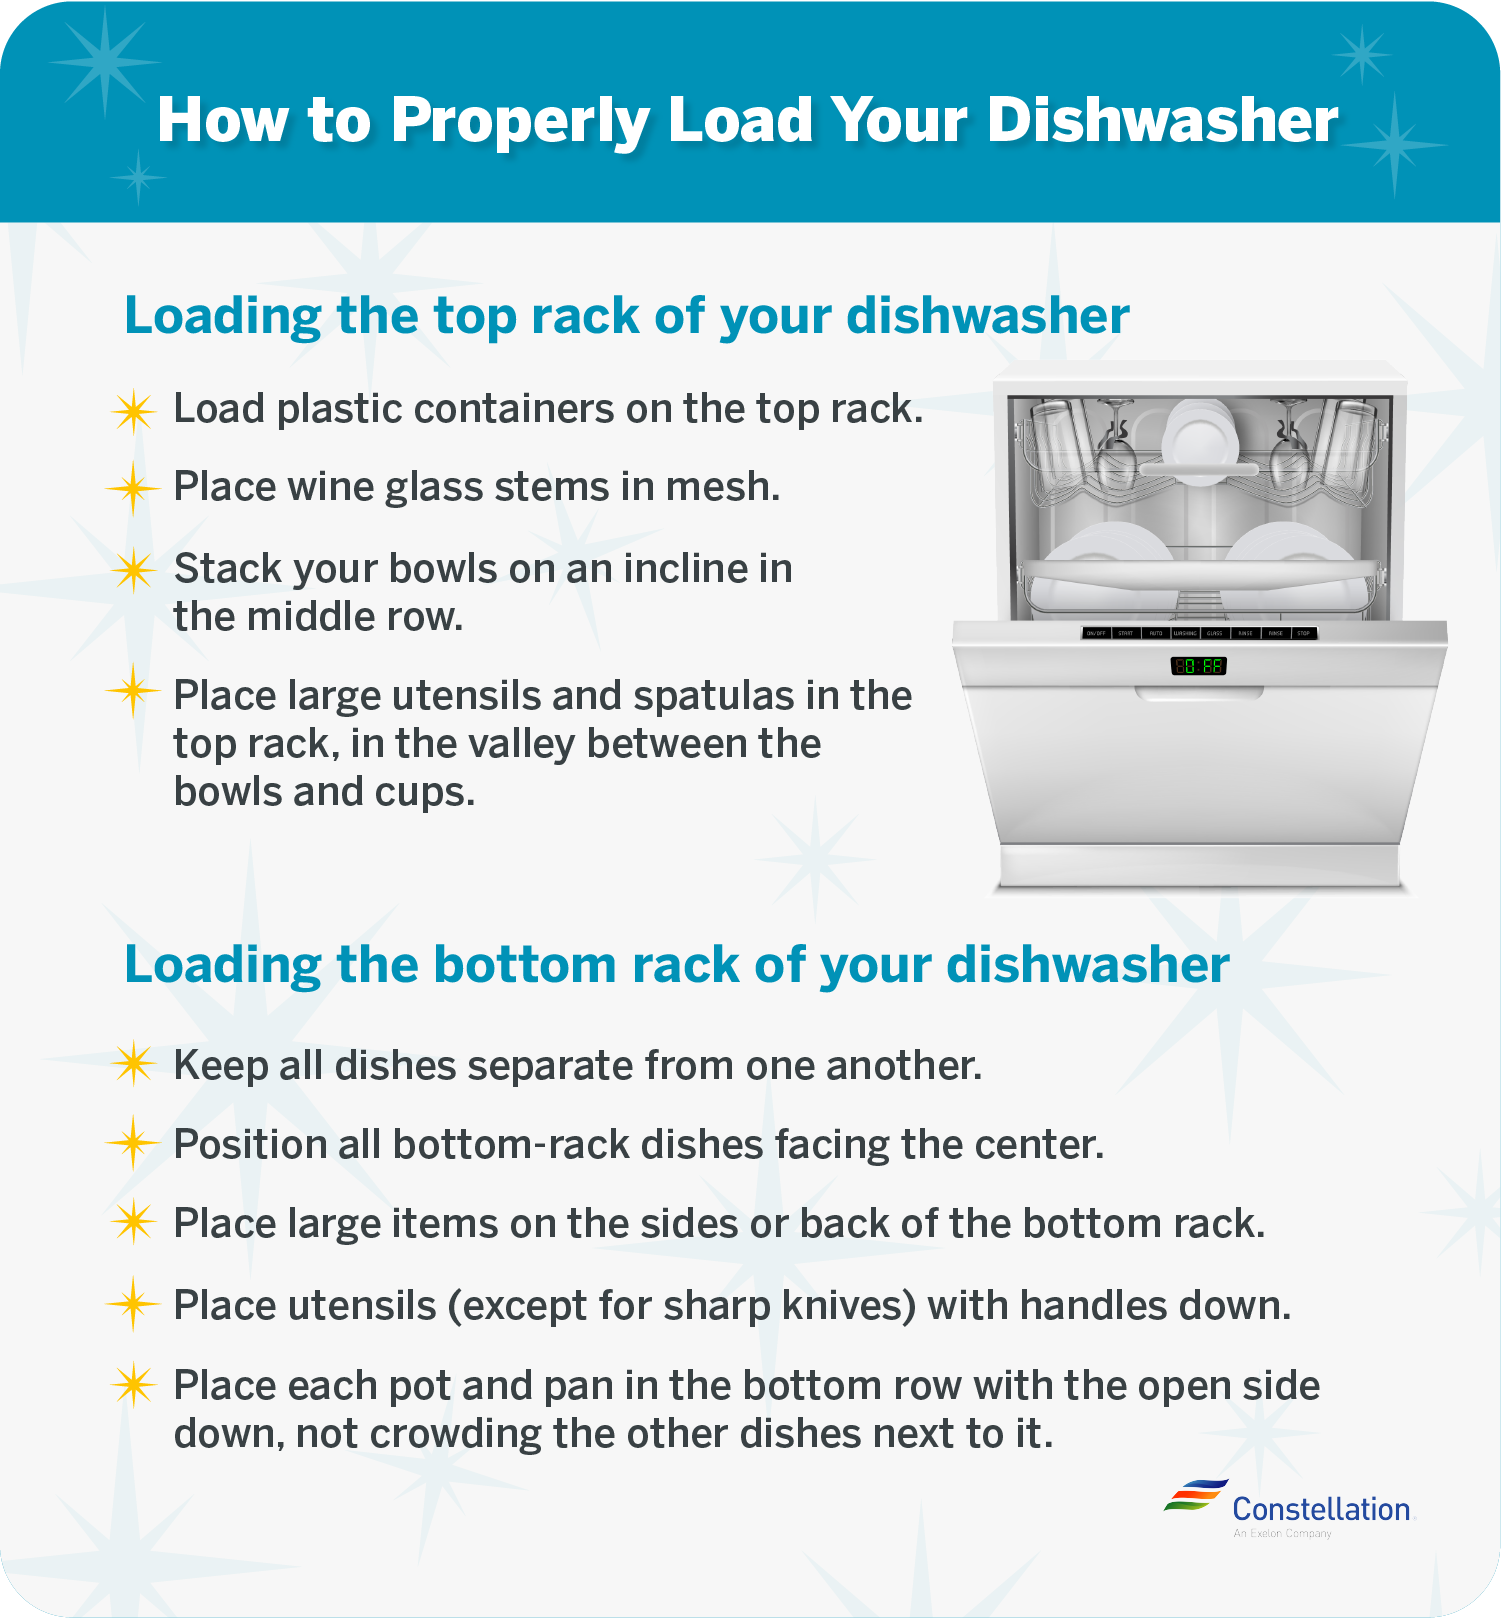 How to properly load your dishwasher